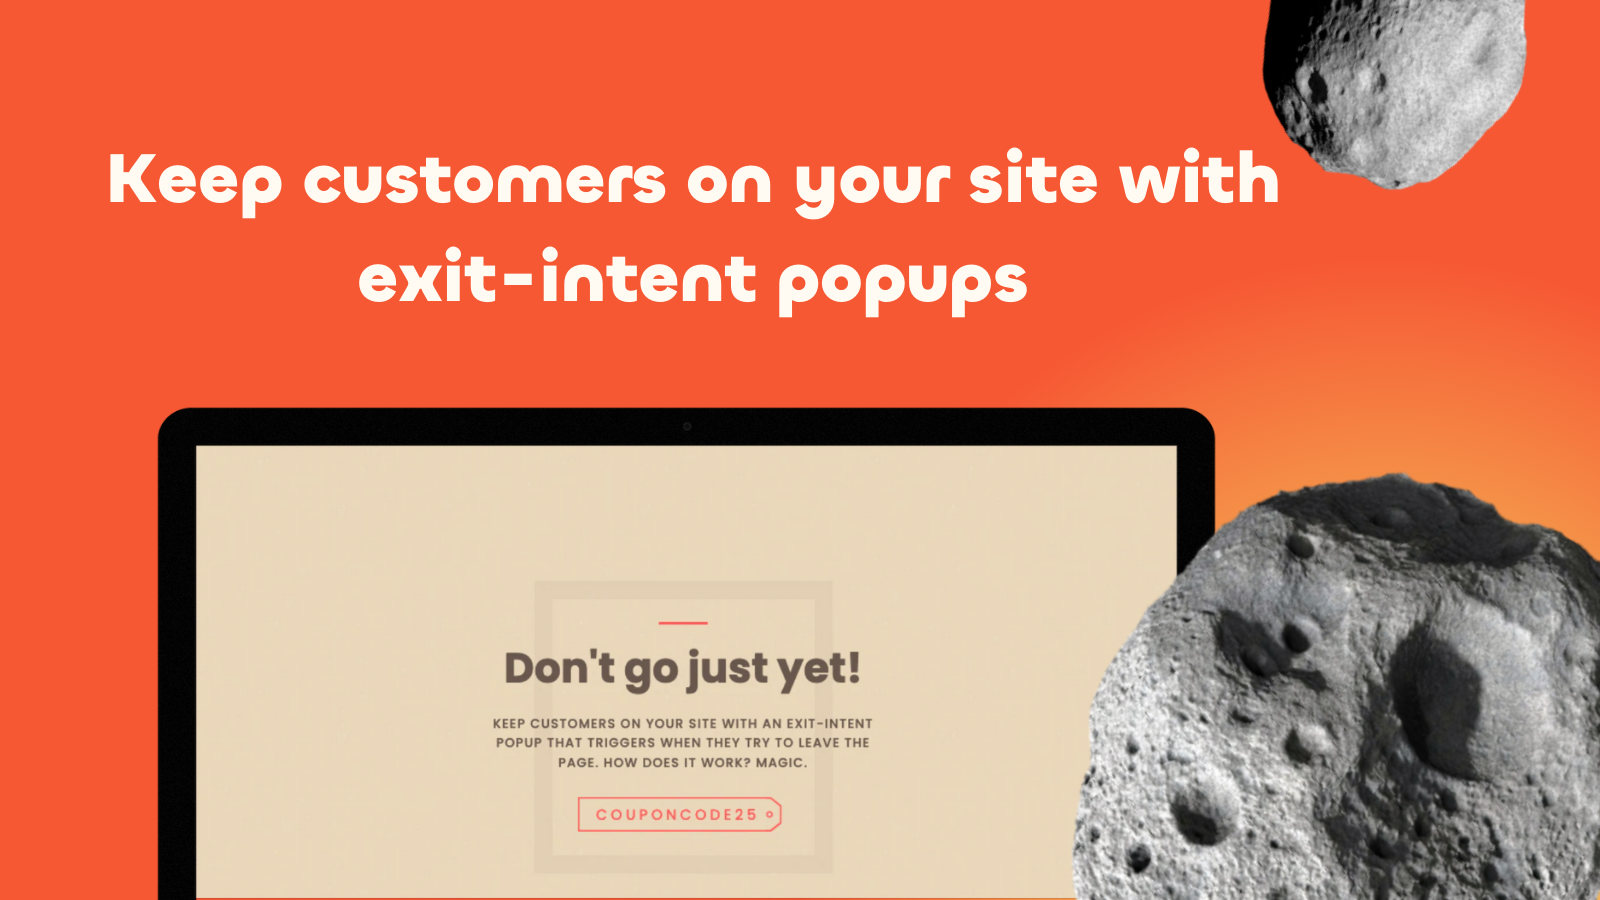 Keep customers on your site with exit-intent popups